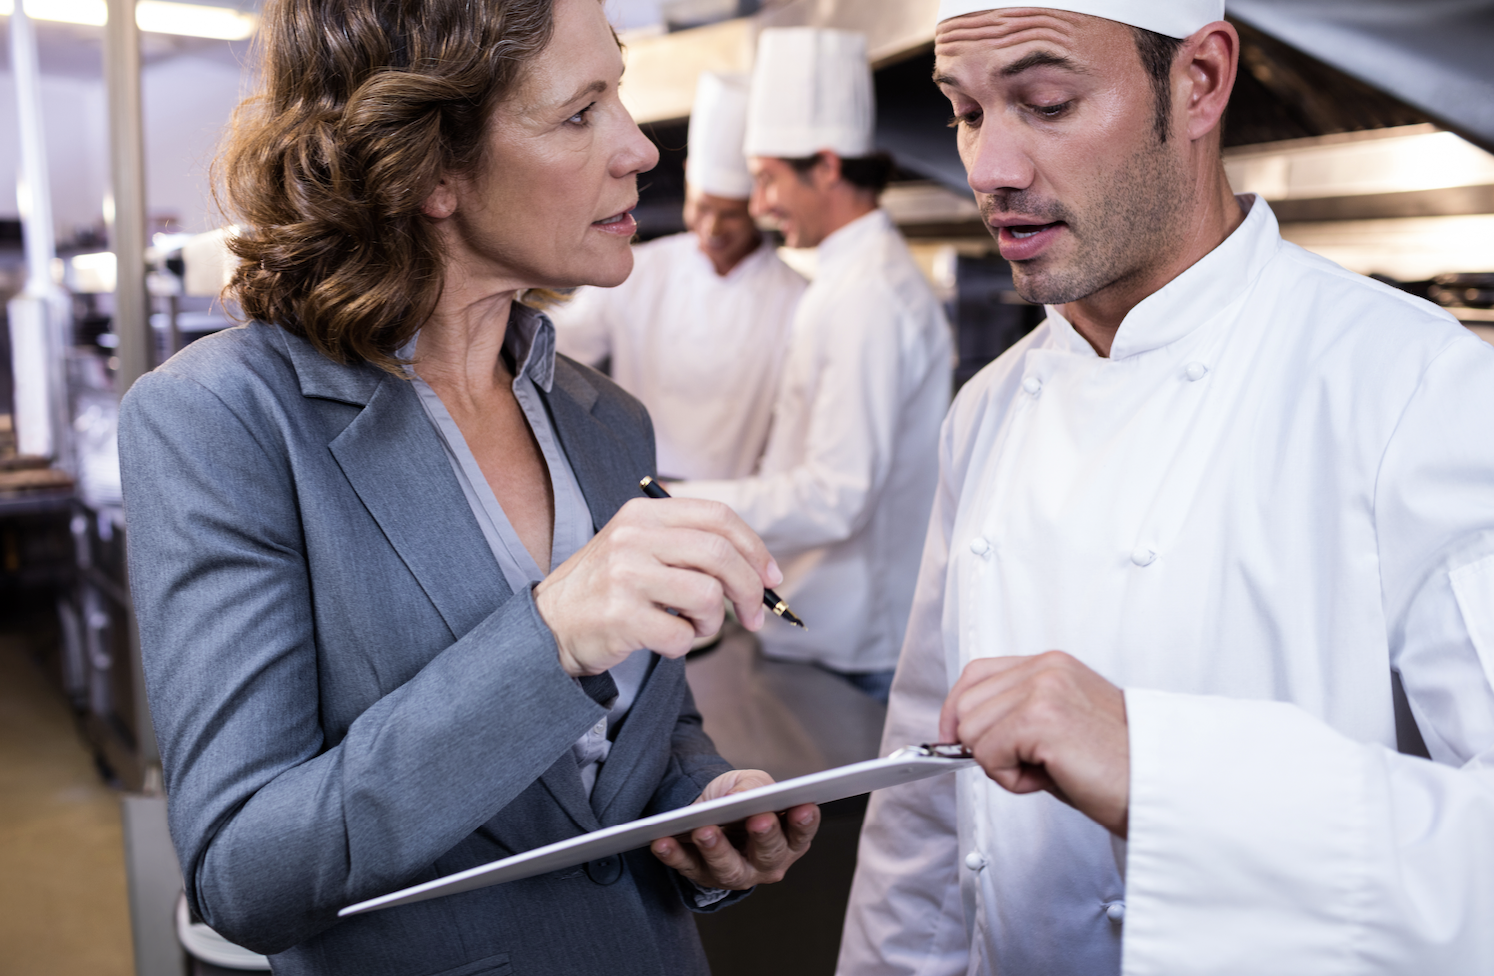 Adapting to Change: How the Insurance Market Shift Affects Restaurants and Brokers